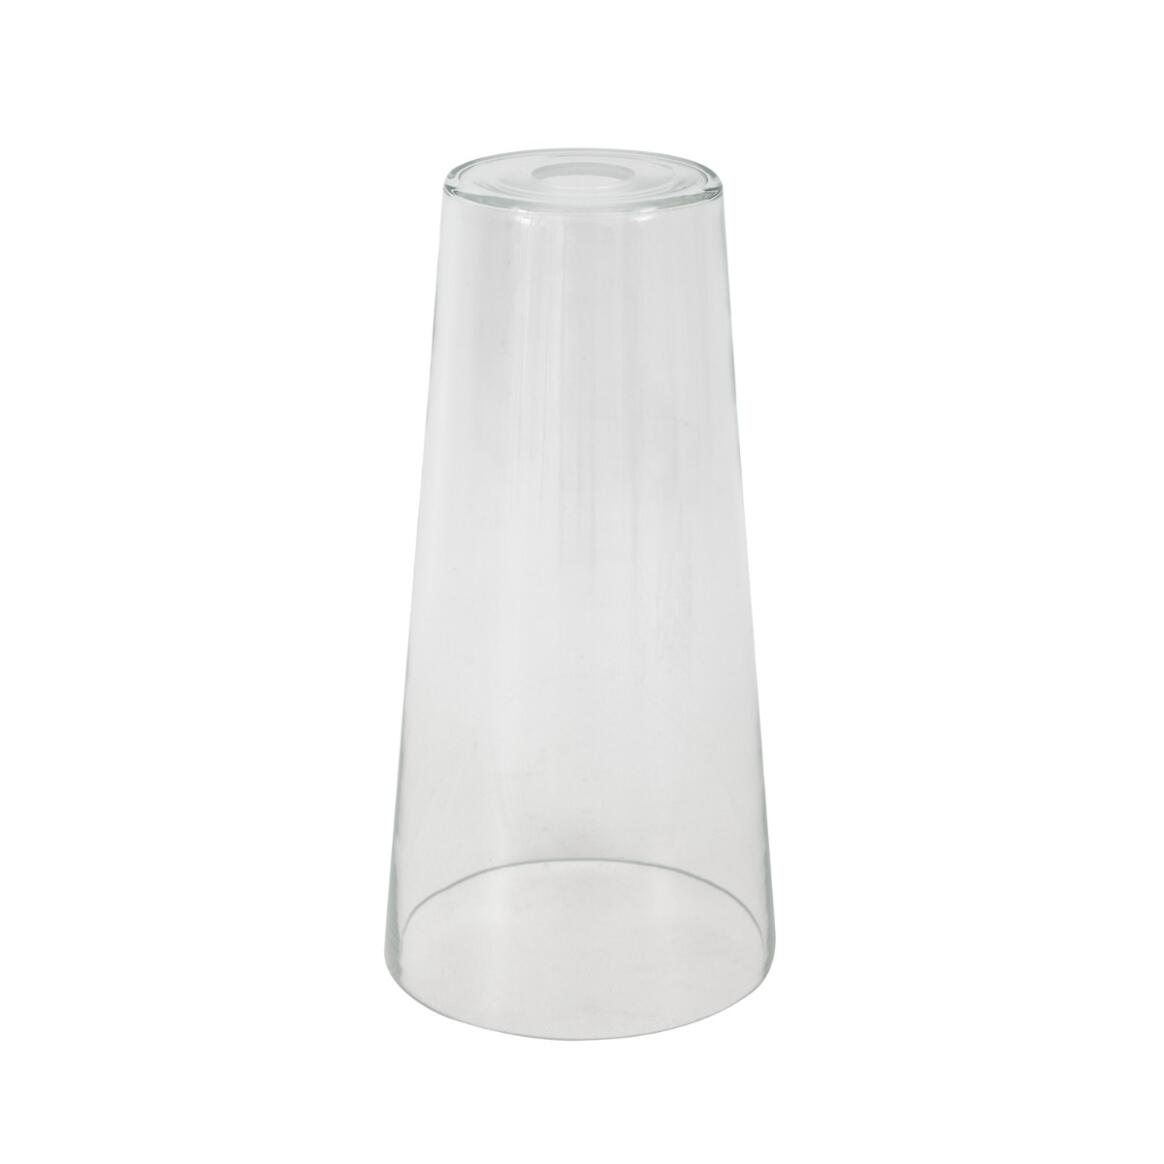 Tall cone clear glass lamp shade 17.5cm main product image